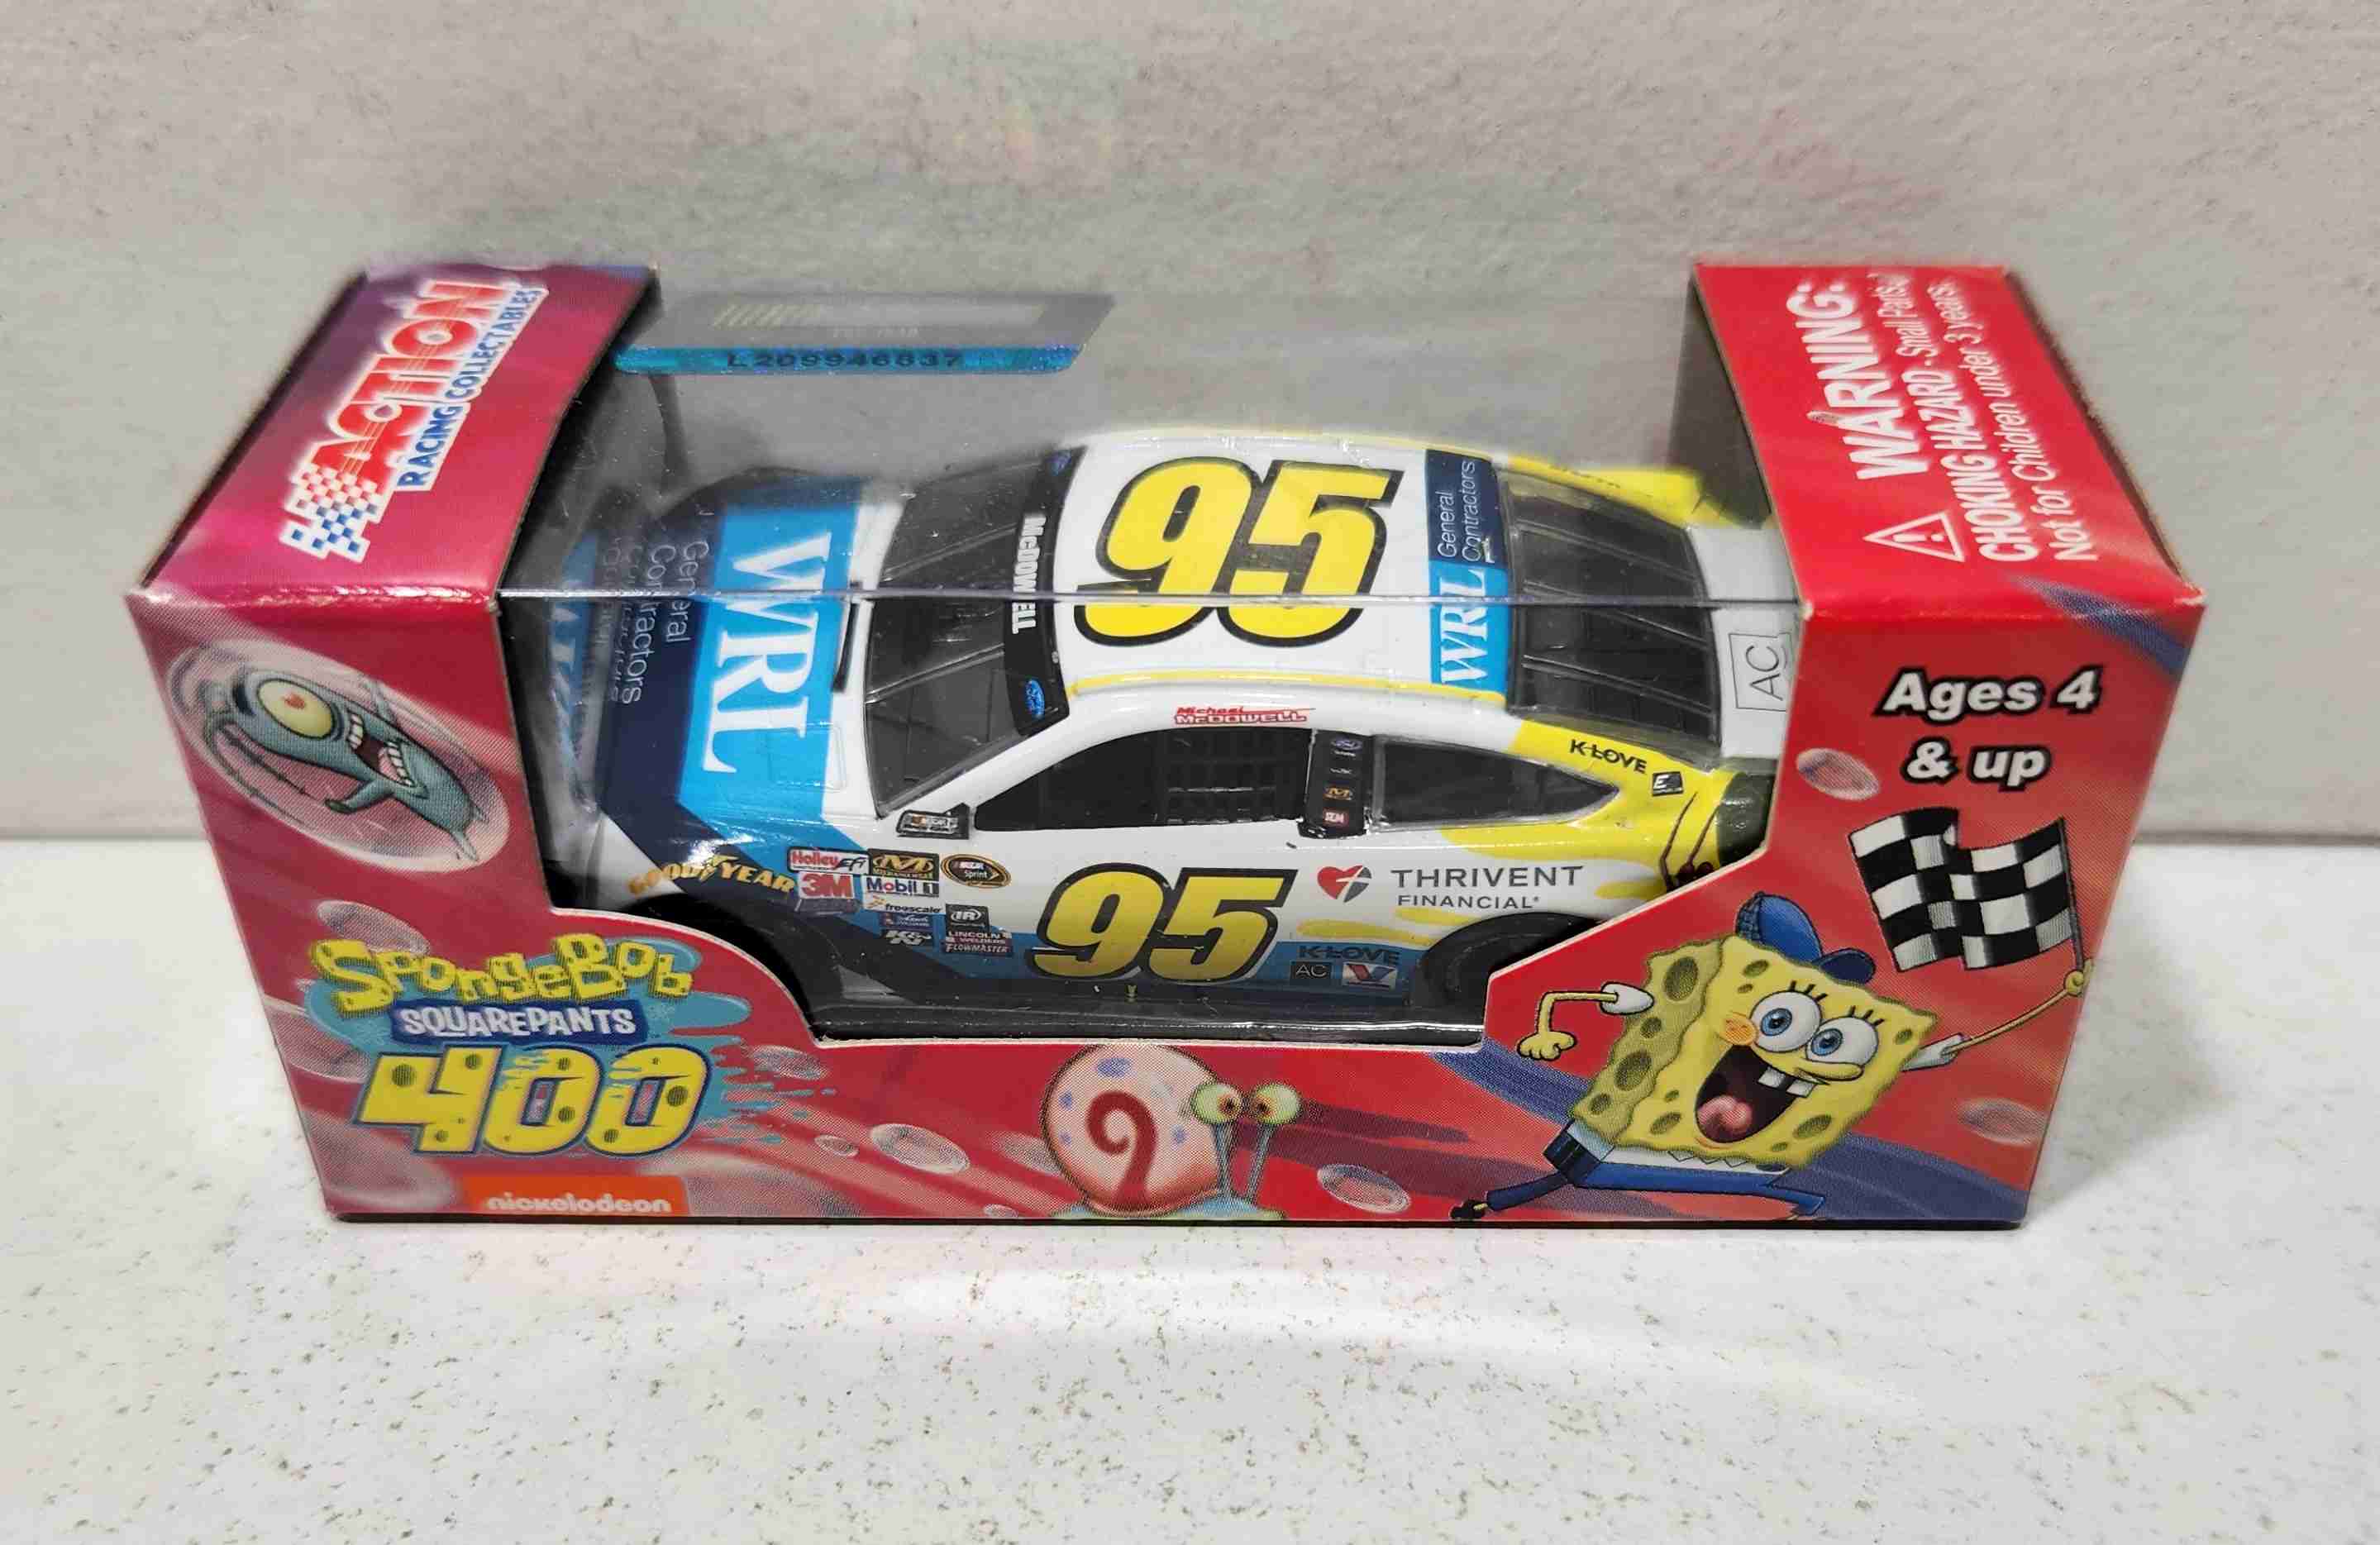 2015 Michael McDowell 1/64th Sponge Bob "Larry the Lobster" Pitstop Series Fusion